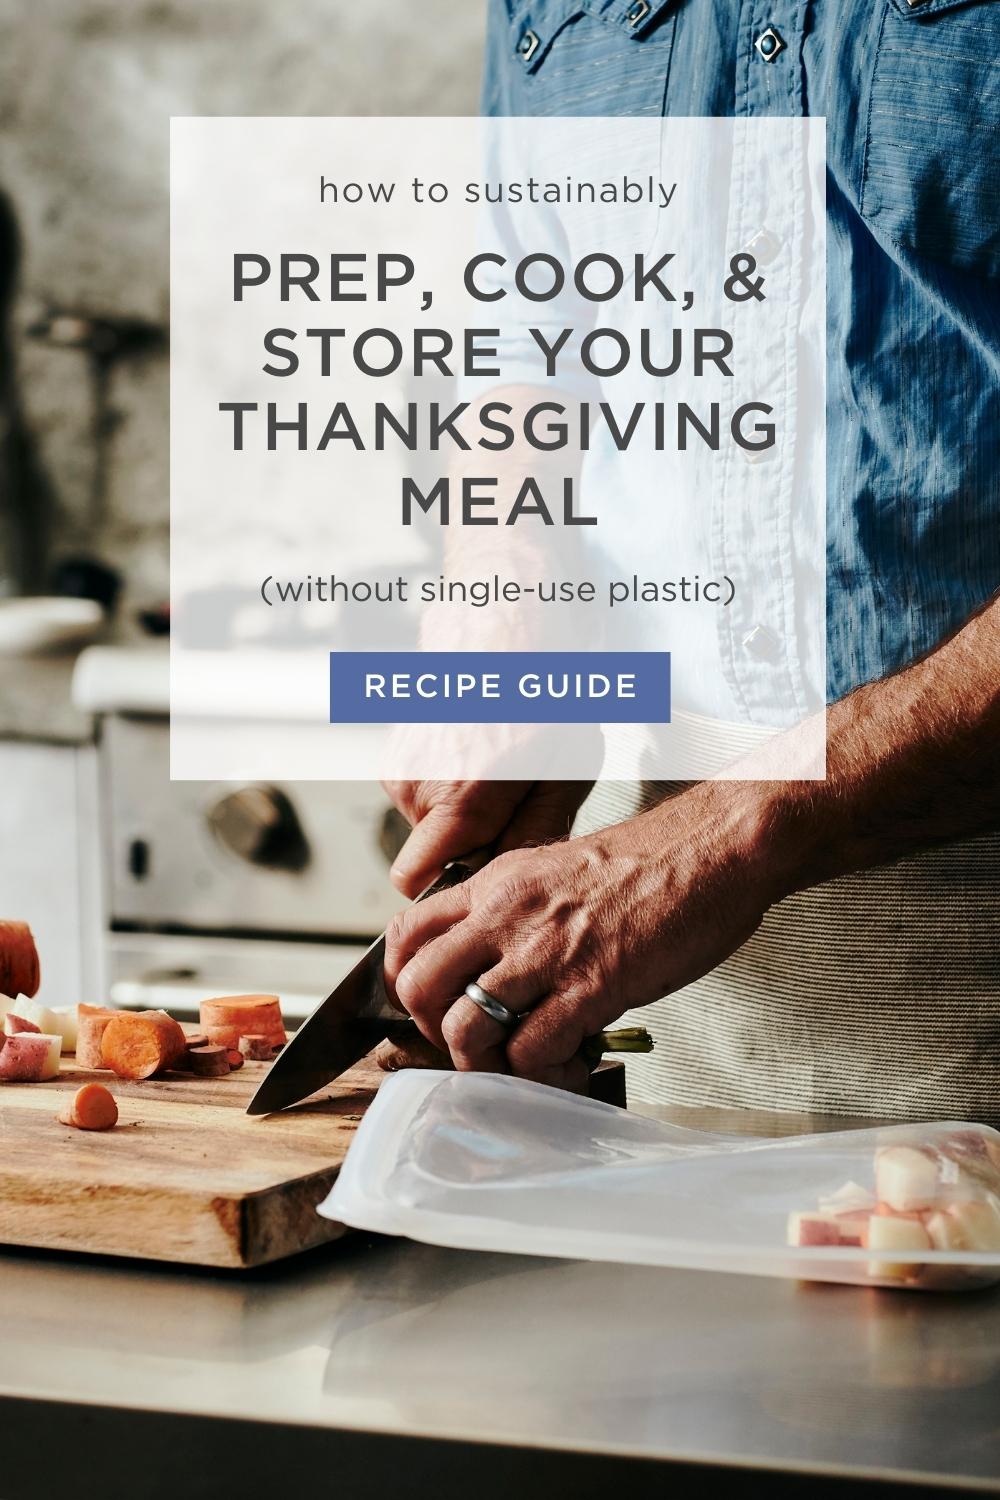 Prep, Cook, and Store Your Thanksgiving Meal in a Reusable Bag